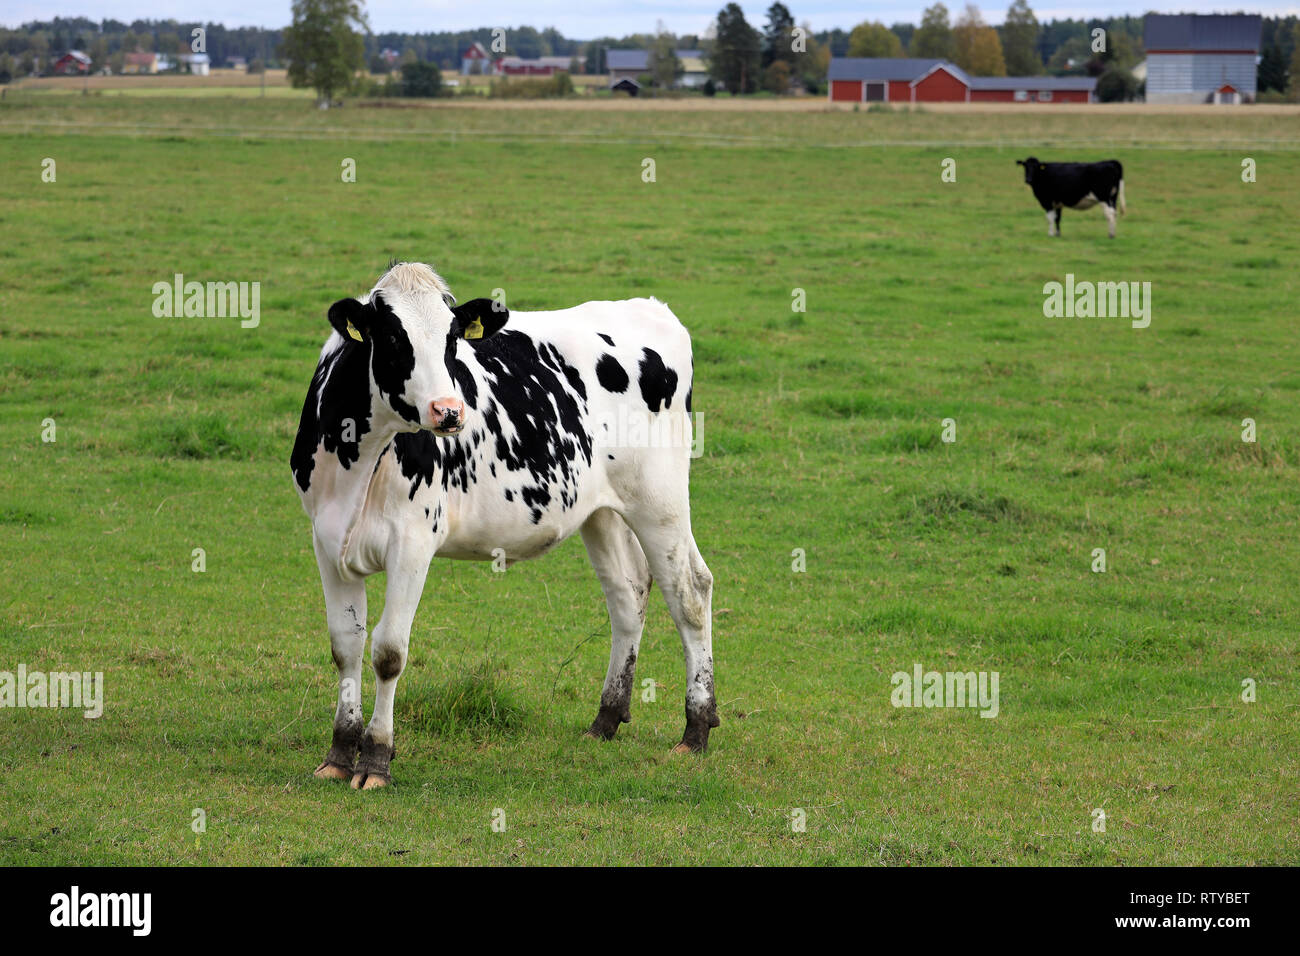 Young, curious Holstein-Friesian cow standing on green grassy farmland on a day of summer. Stock Photo